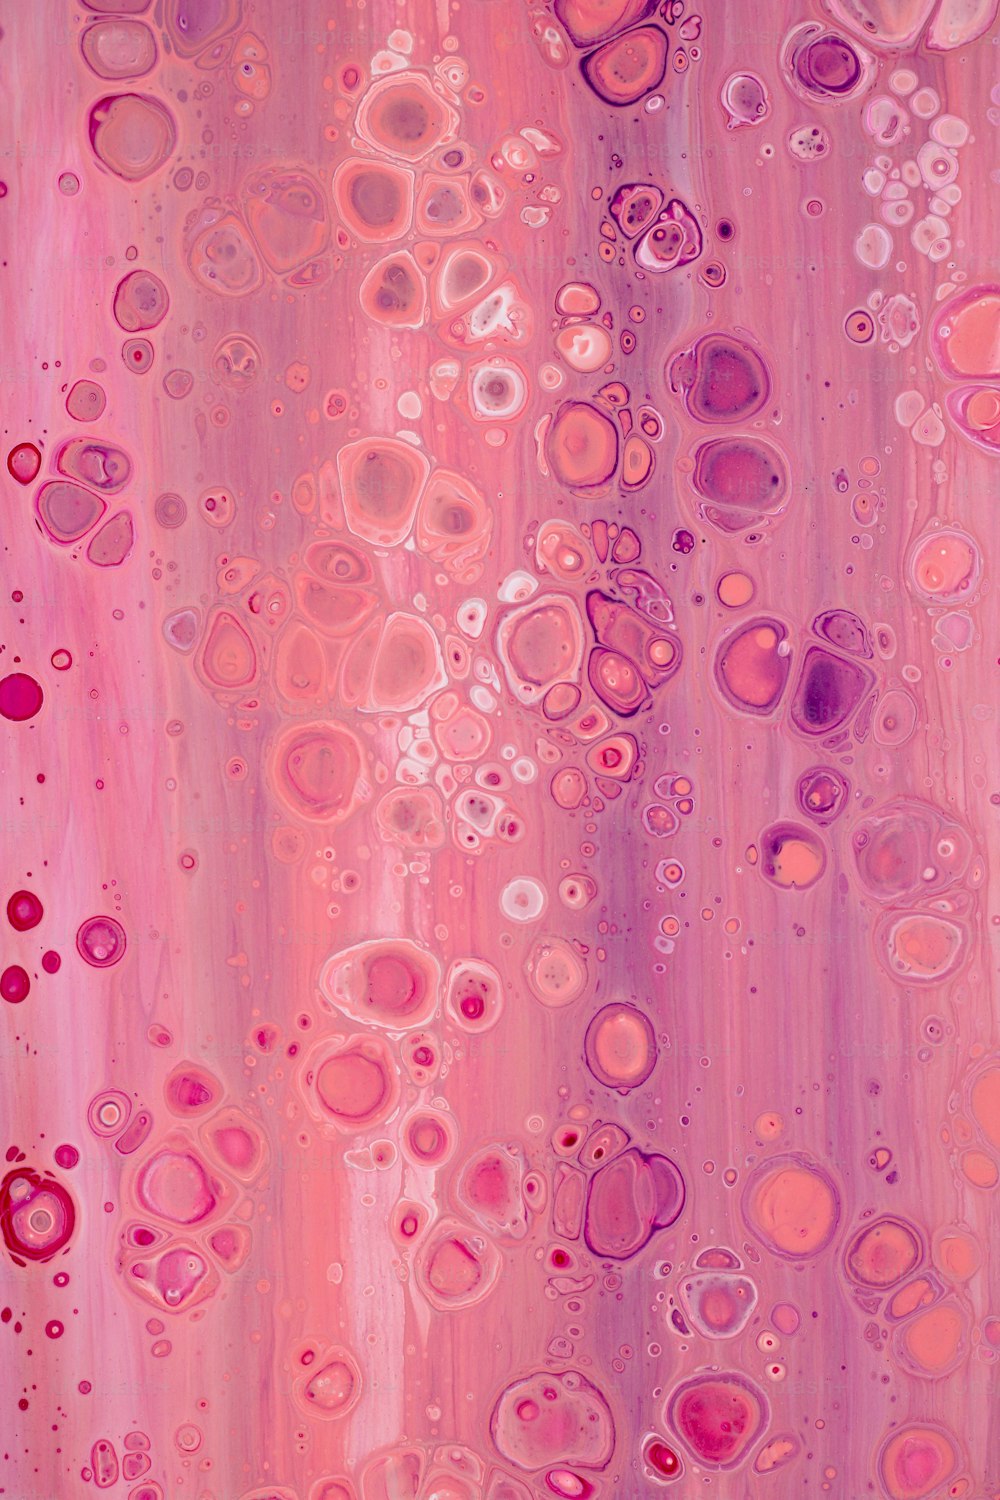 a close up of a pink background with bubbles